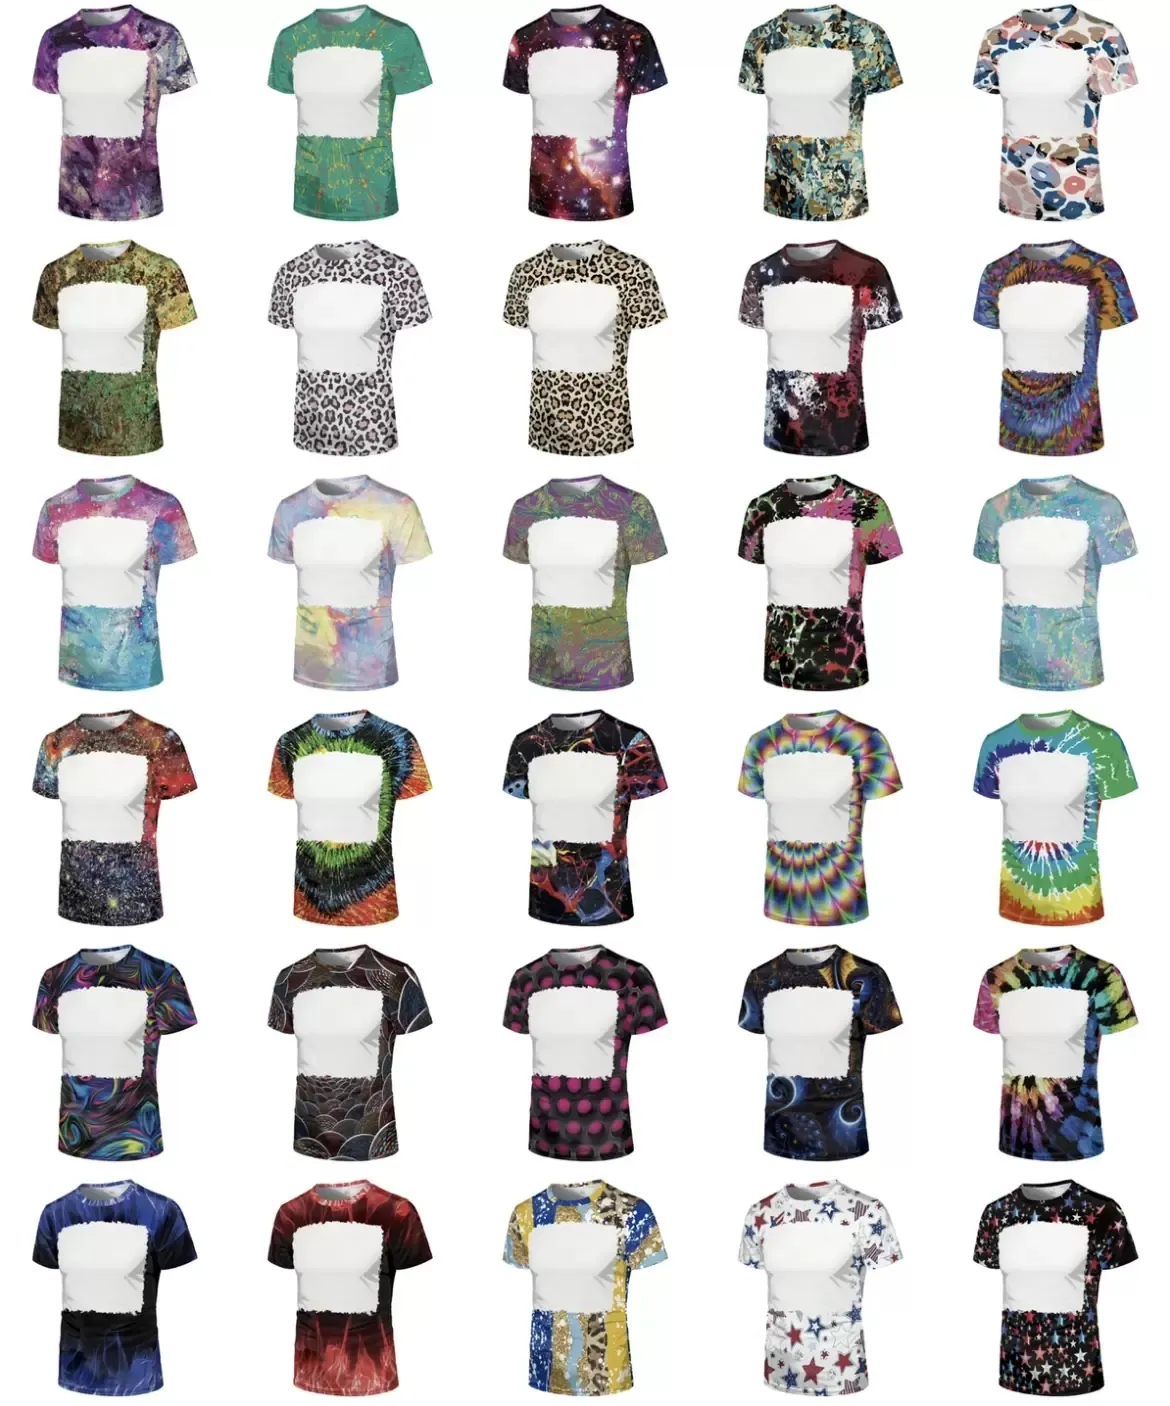 Wholesale Party Supplies Sublimation Bleached T-shirt Heat Transfer Blank Bleach Shirt fully Polyester tees US Sizes for Men Women 30 colors GC1018X2